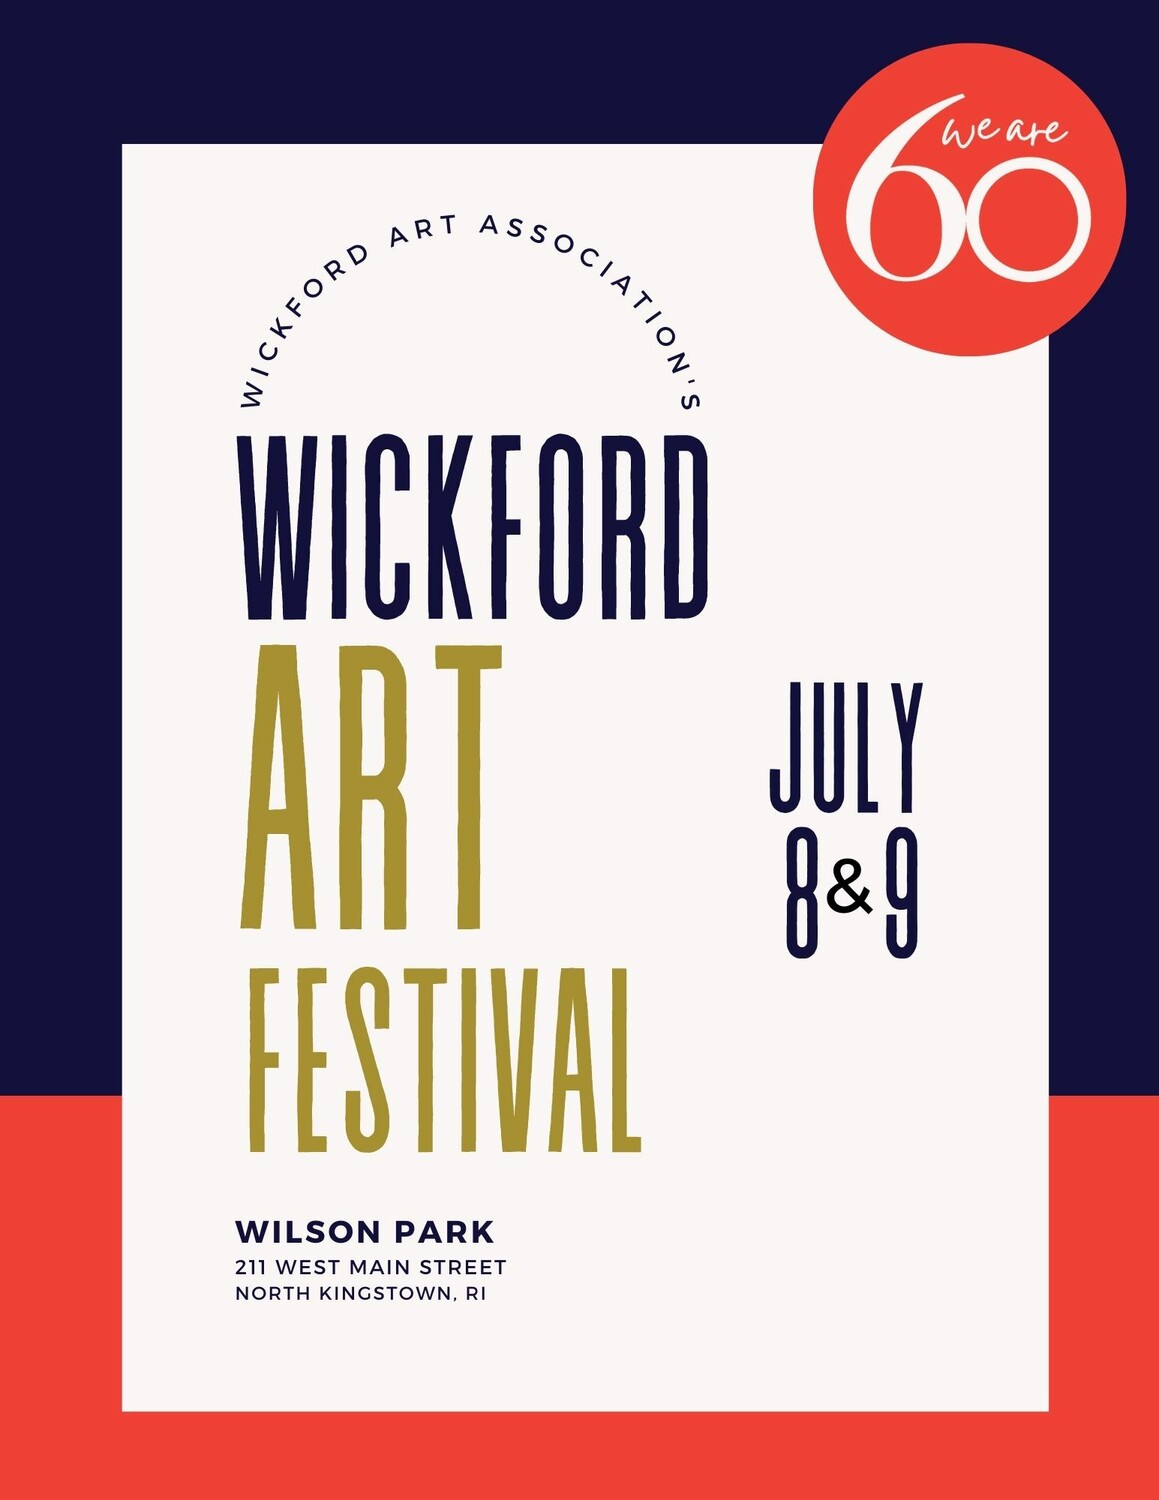 WAA is Celebrating our 60th Wickford Art Festival on July 8th & 9th